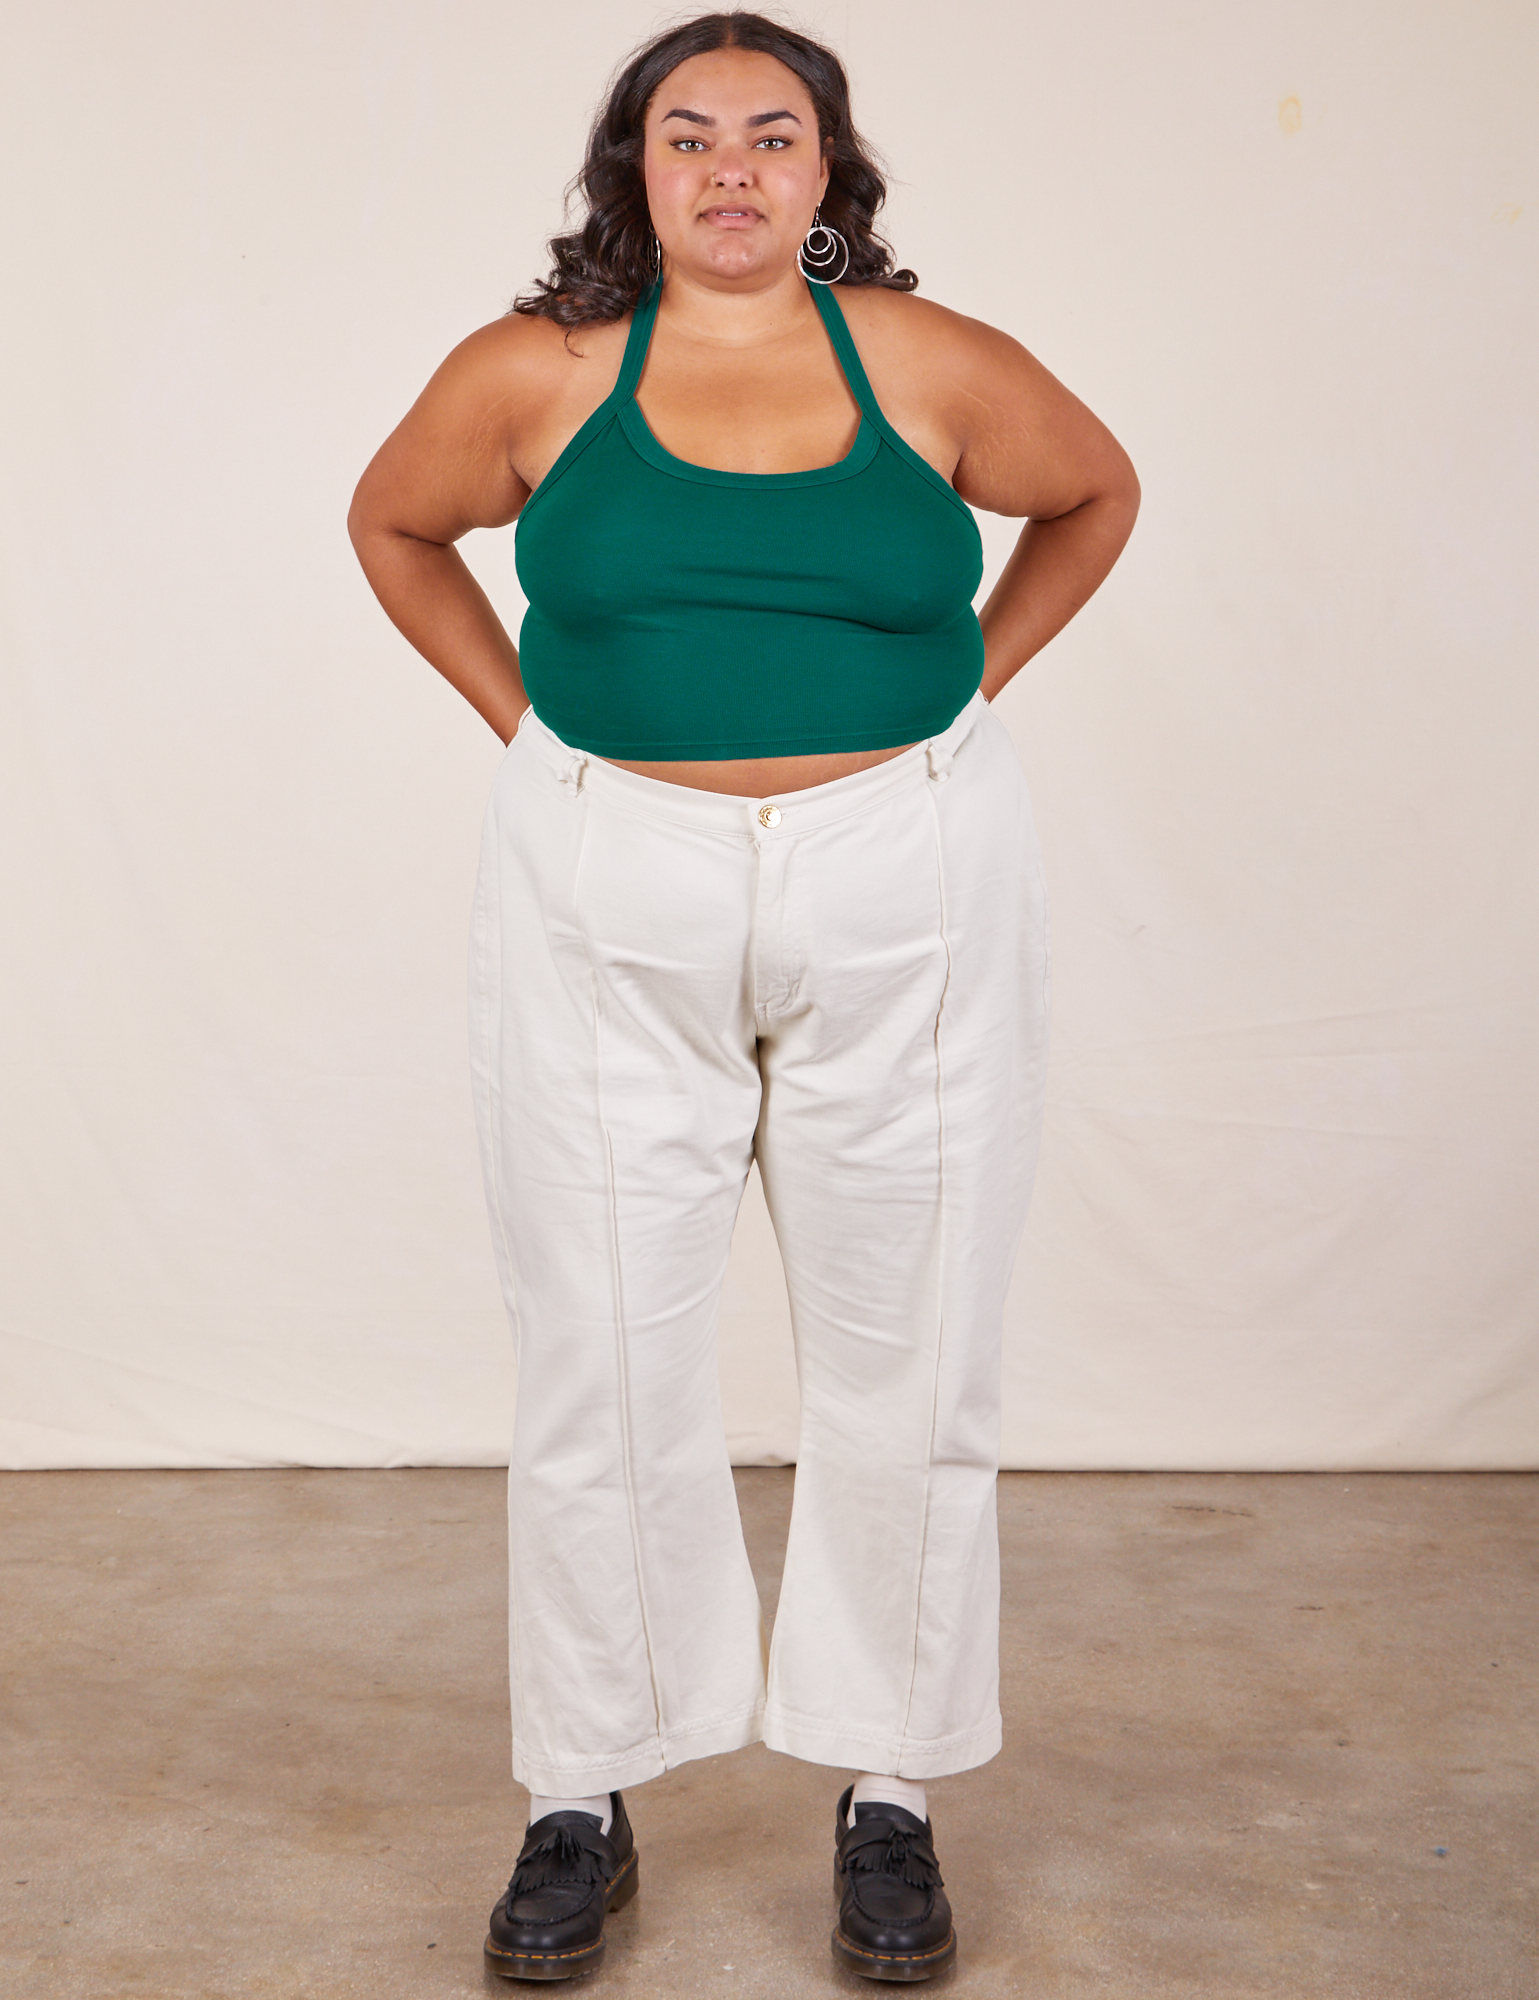 Alicia is wearing Halter Top in Hunter Green and vintage off-white Western Pants